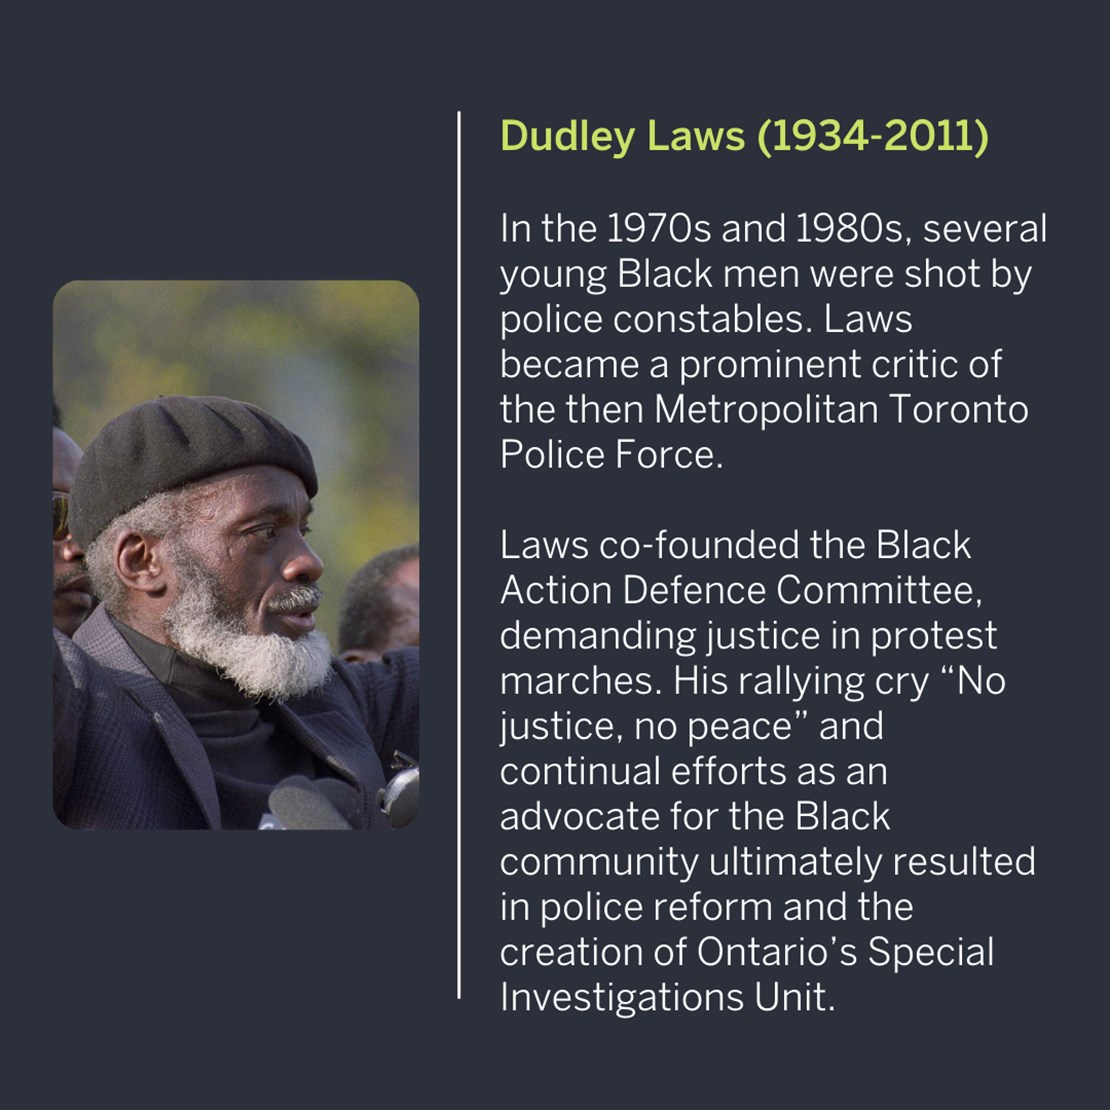 Dudley Laws